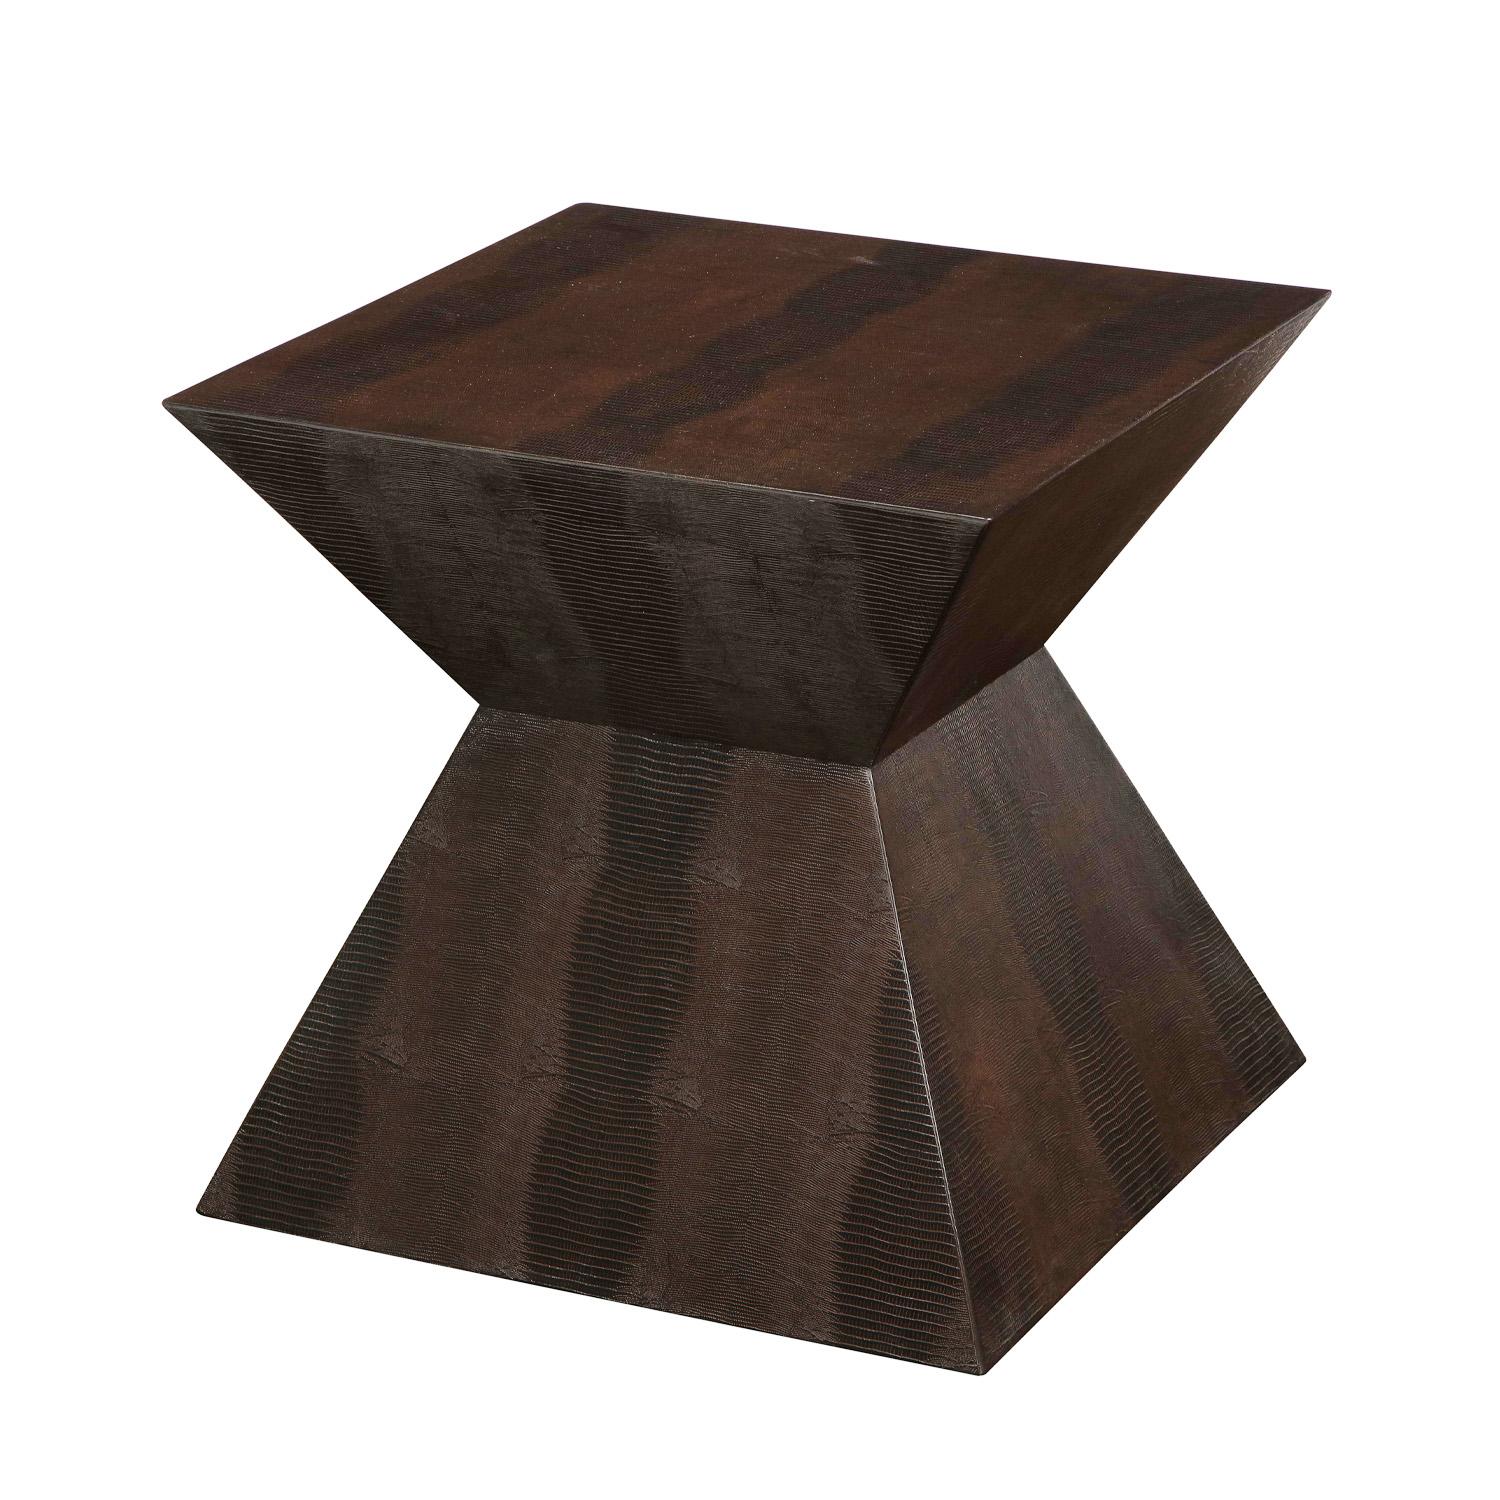 Beautifully crafted Zig Zag Side Table in 2-tone brown embossed lizard leather by Karl Springer, American 1980's. This table is completely finished, even the bottom.  This table is superb and is a perfect example of Springer’s relentless devotion to